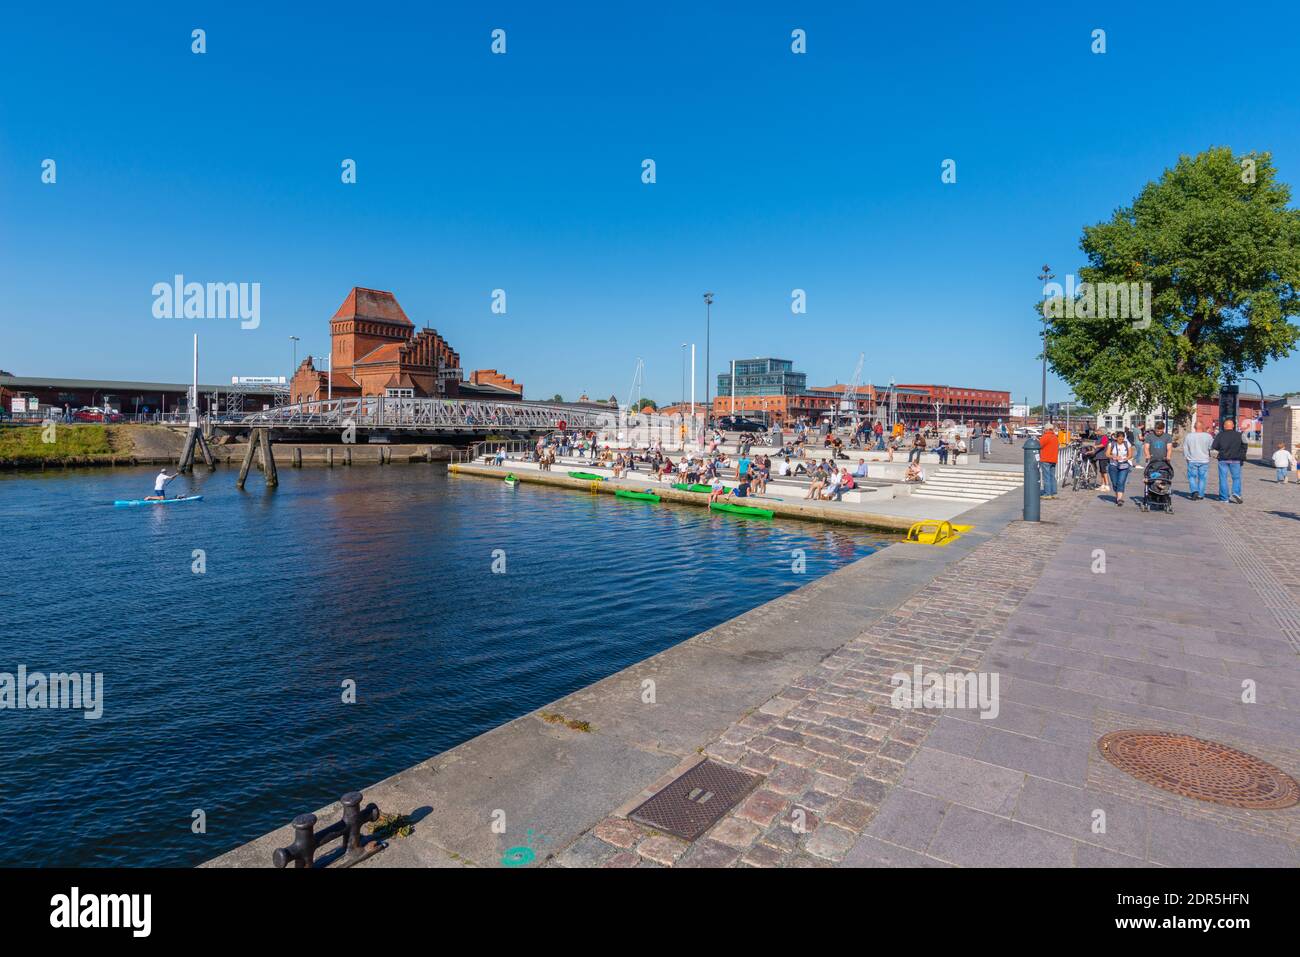 Leisure time at Holstenhafen at a sunny autumn day, Hanseatic City of Lübeck, Schleswig-Holstein, North Germany, Europe Stock Photo